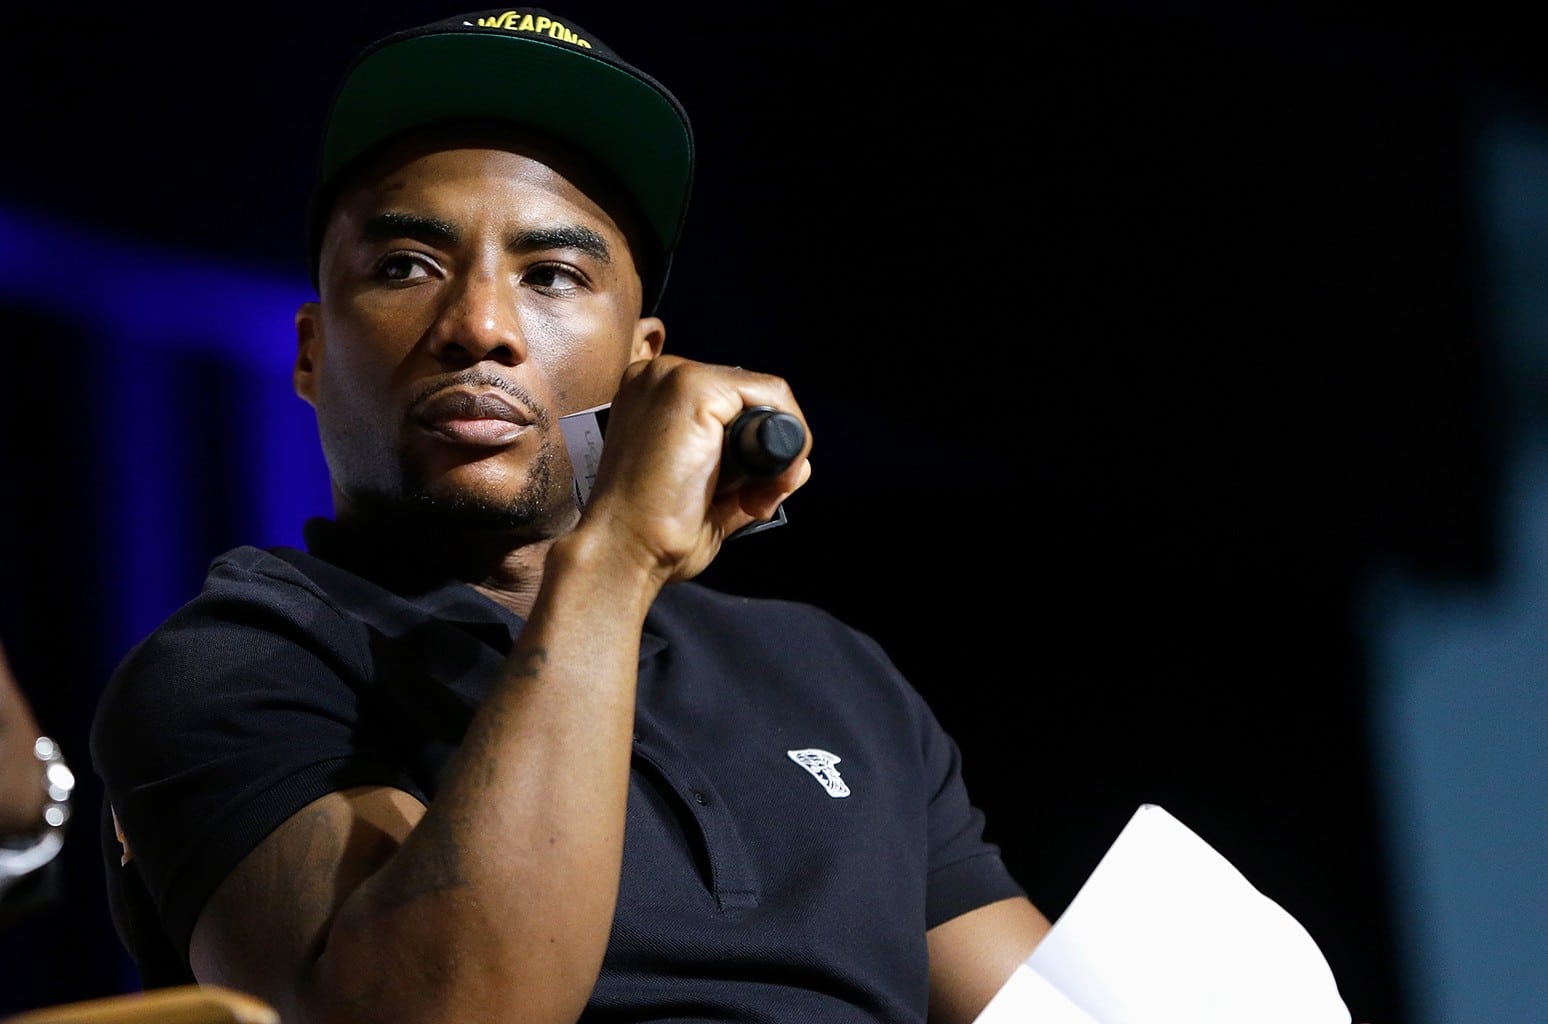 American radio host Charlamagne gives reasons why Burna Boy should have had 8 kids by now